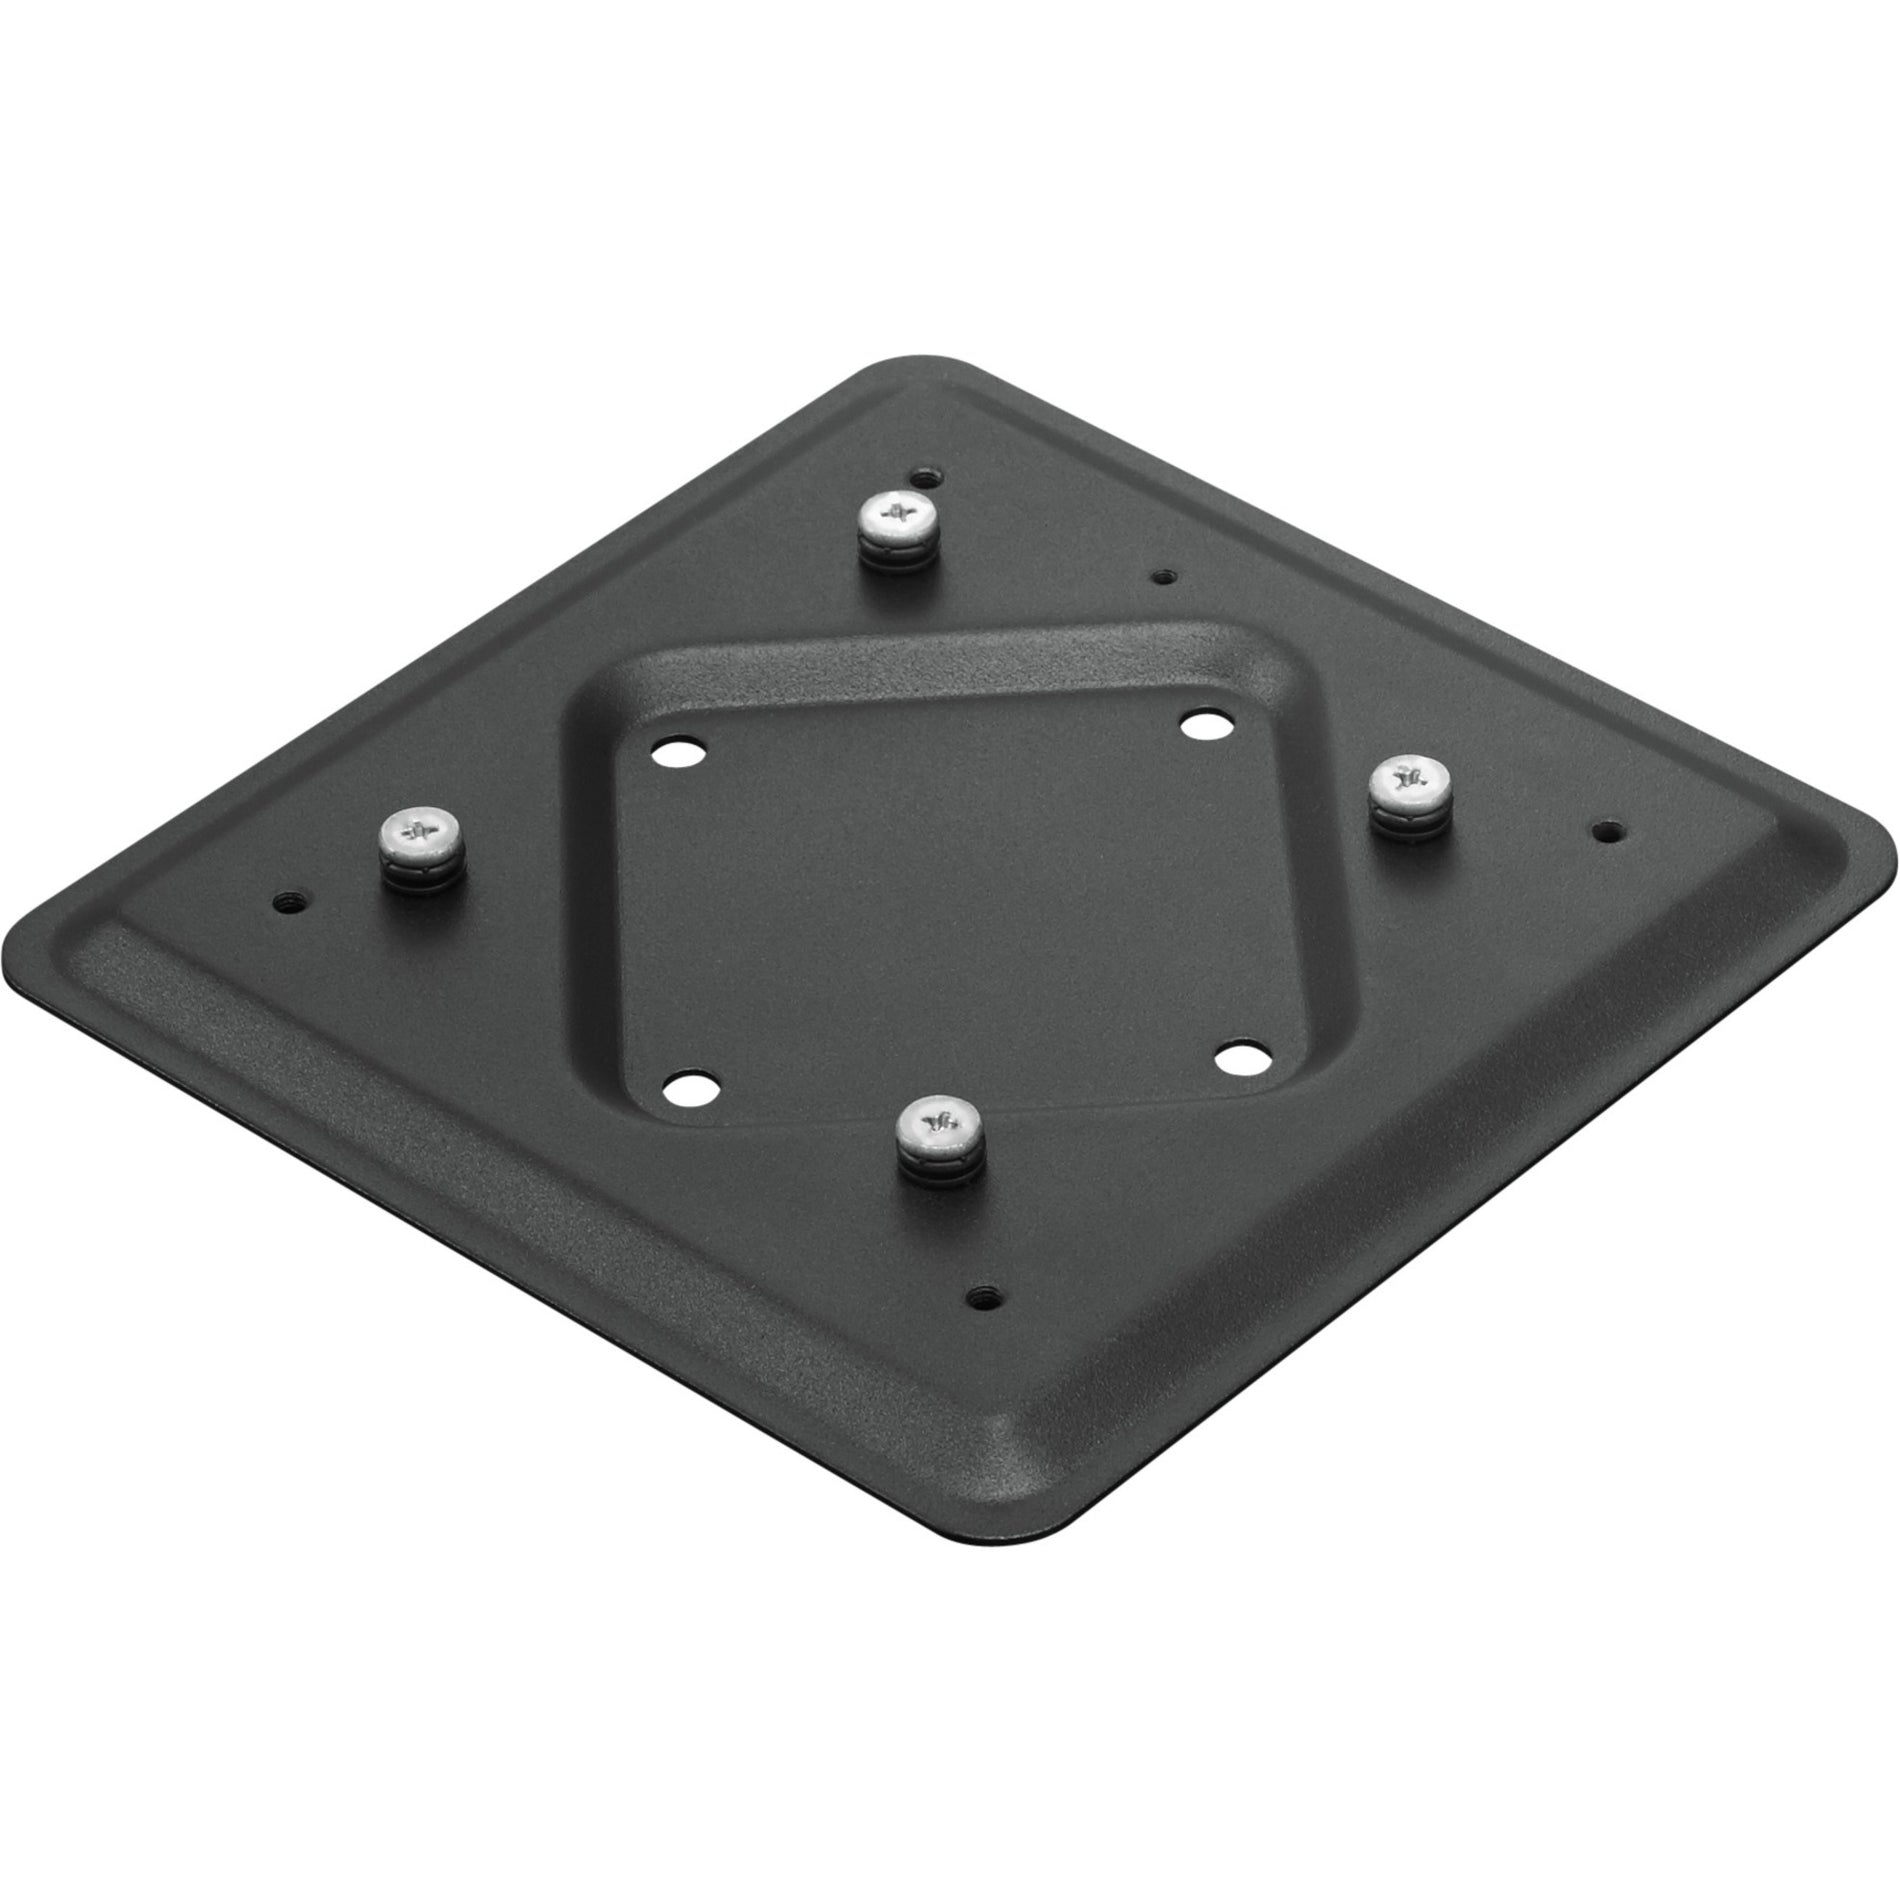 Lenovo 4XF0V81630 Mounting Bracket for Thin Client, Easy Installation and Space-saving Solution